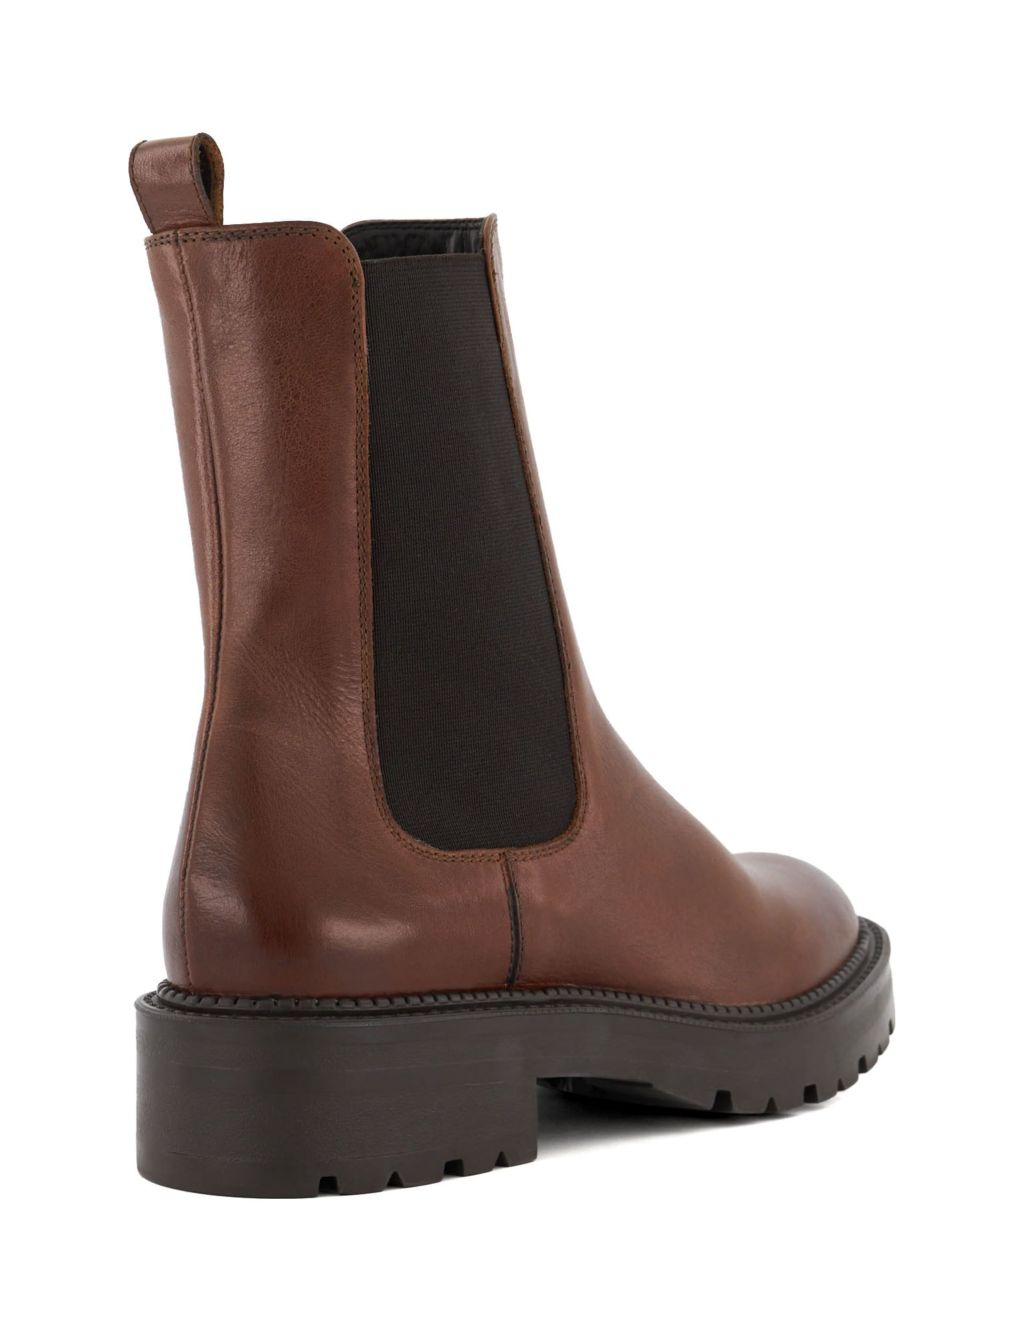 Leather Chunky Chelsea Ankle Boot image 3